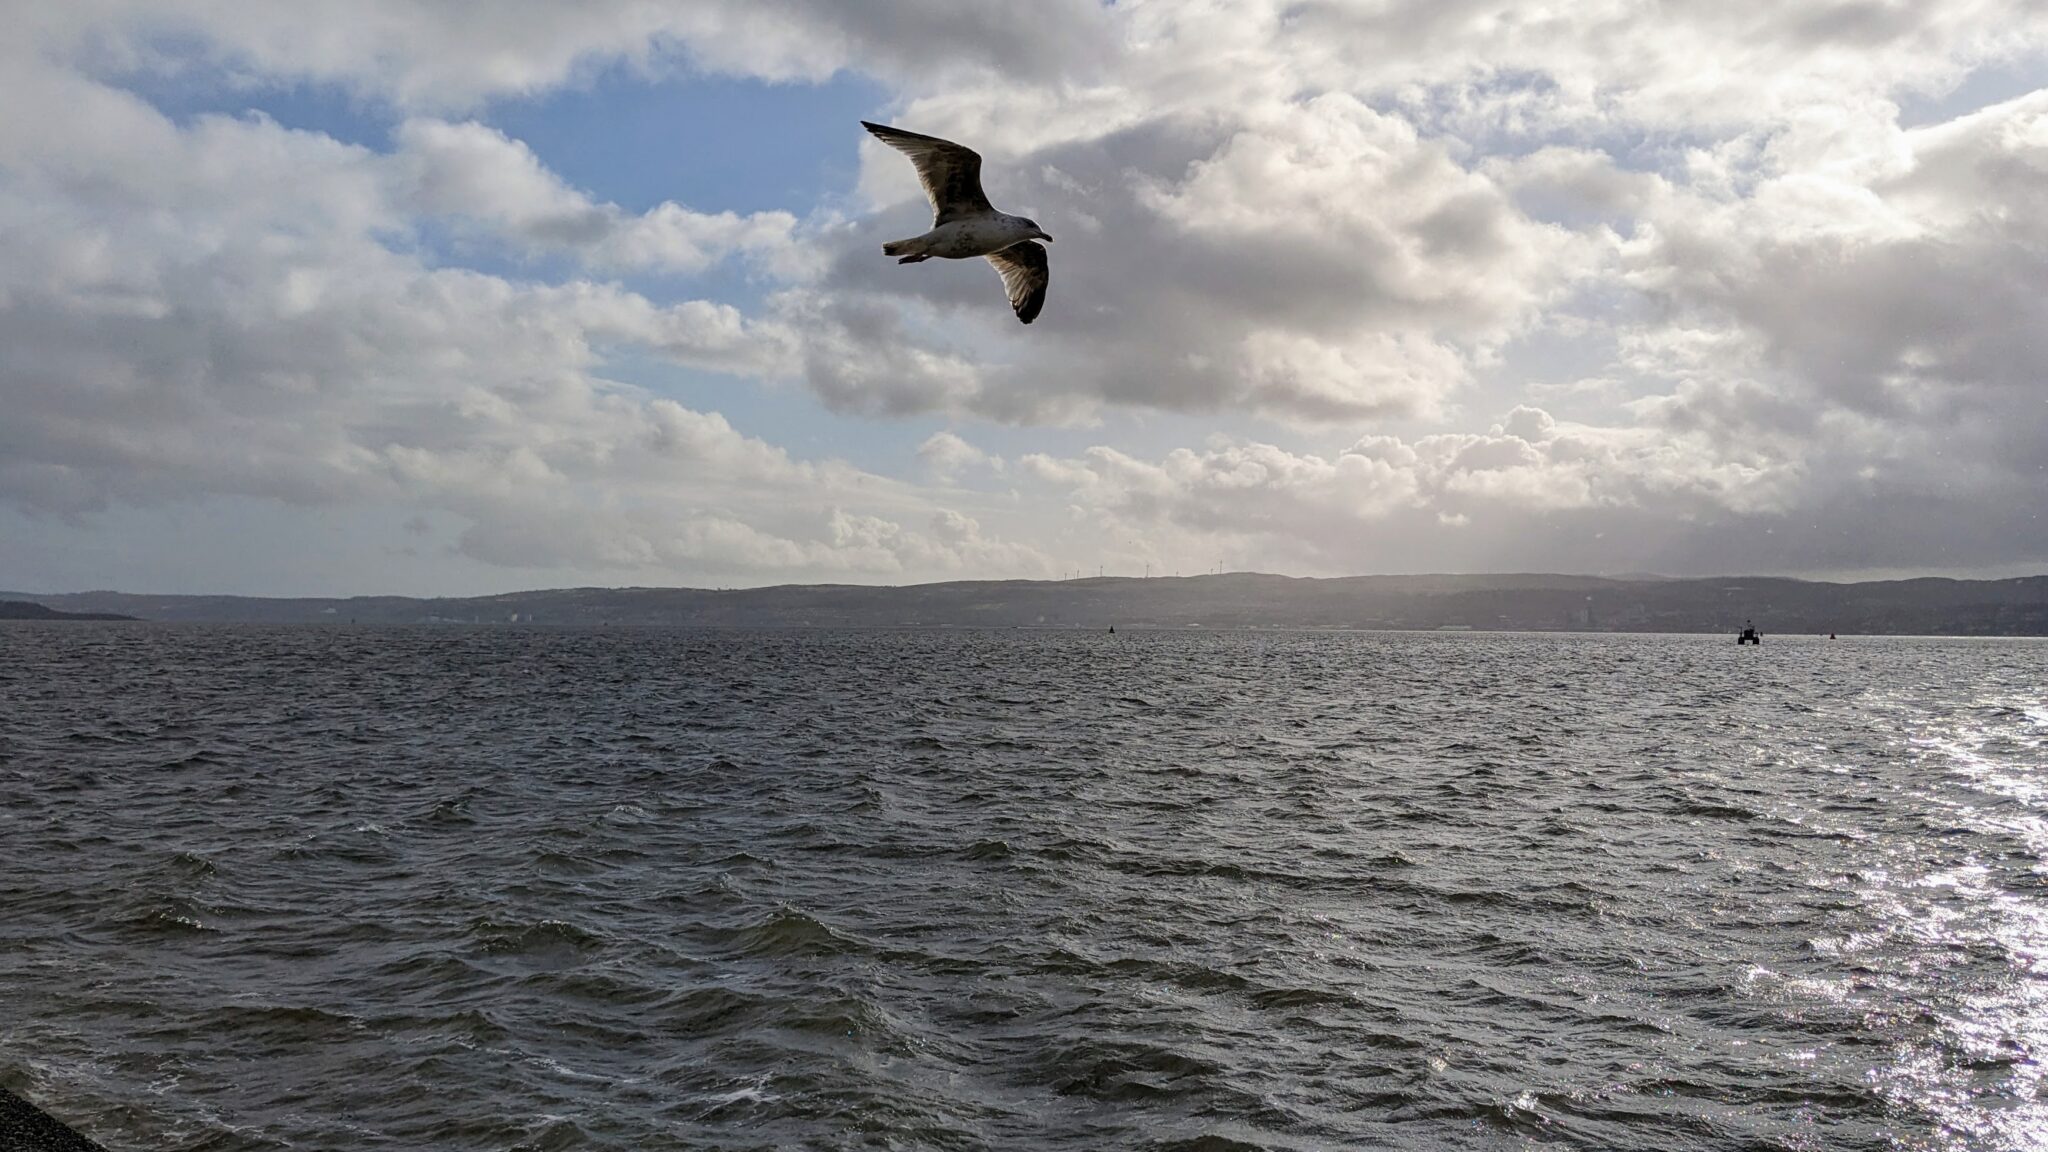 A seagull gliding in the stiff wind above the river Clyde